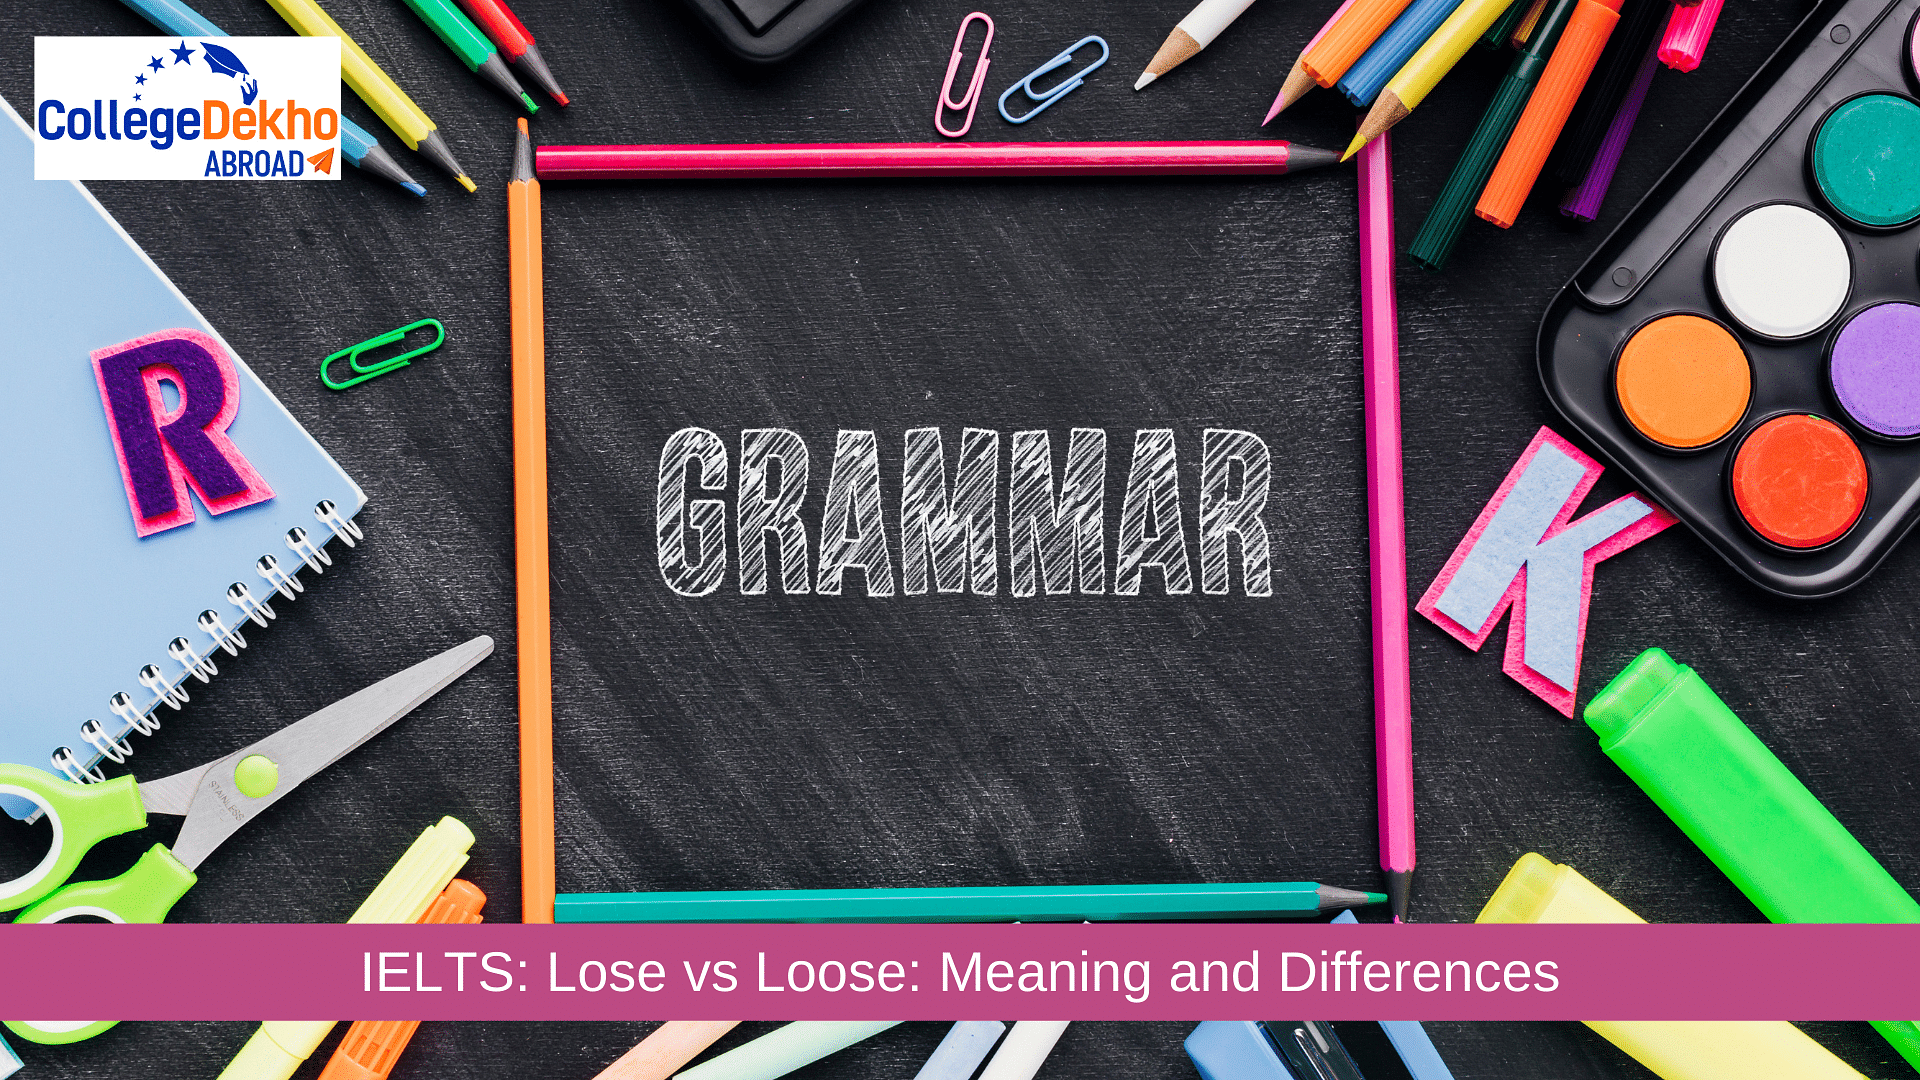 IELTS: Lose vs Loose: Meaning and Differences